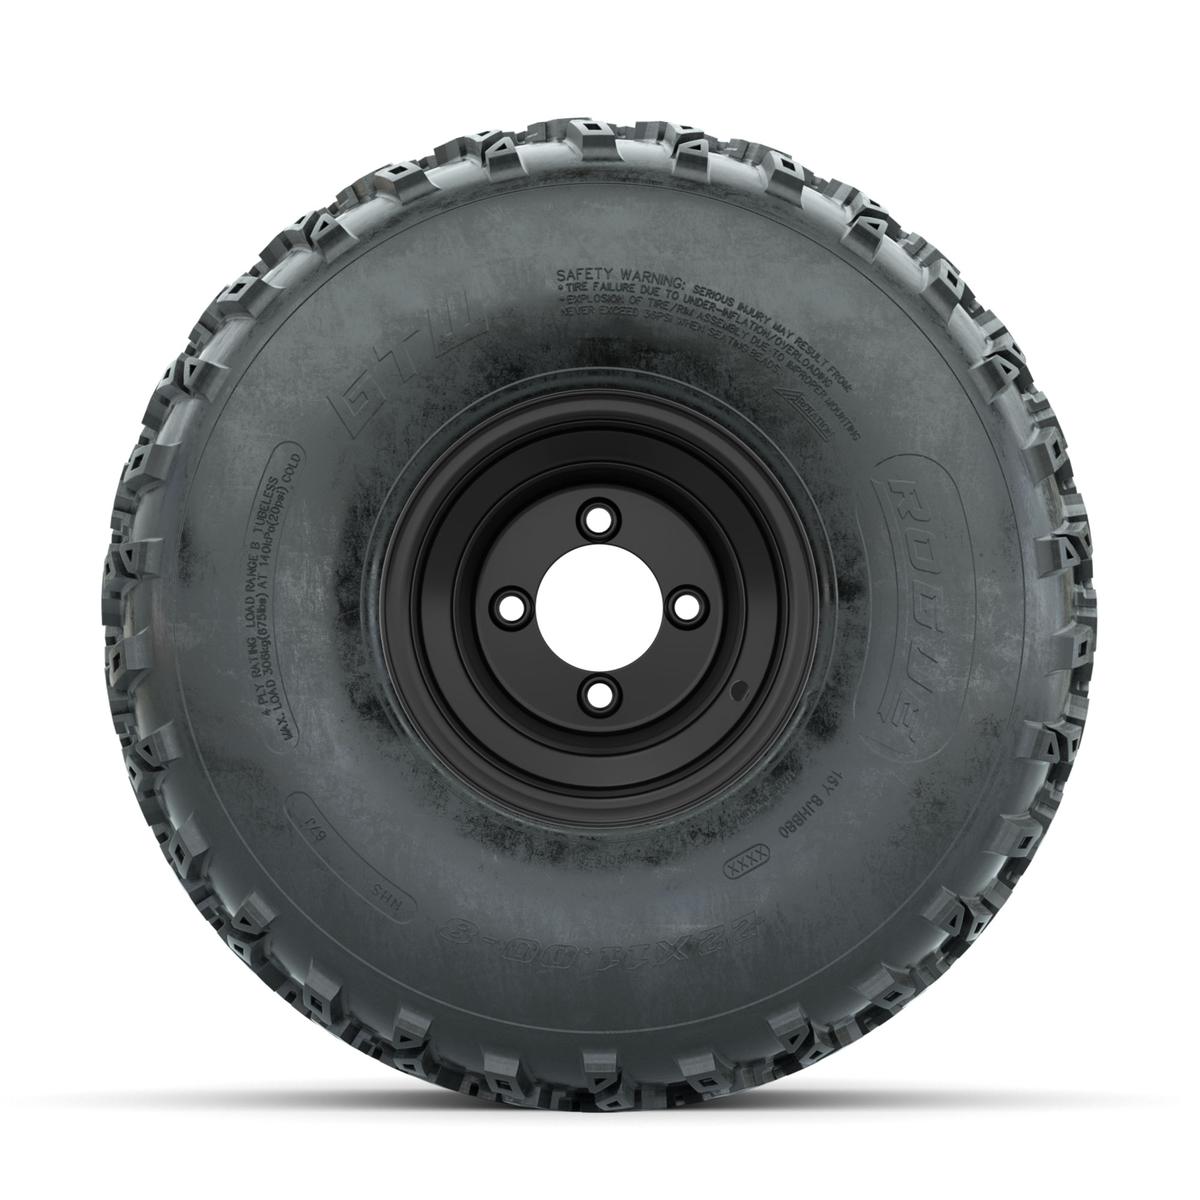 GTW Steel Matte Black 2:5 Offset 8 in Wheels with 22x11.00-8 Rogue All Terrain Tires – Full Set